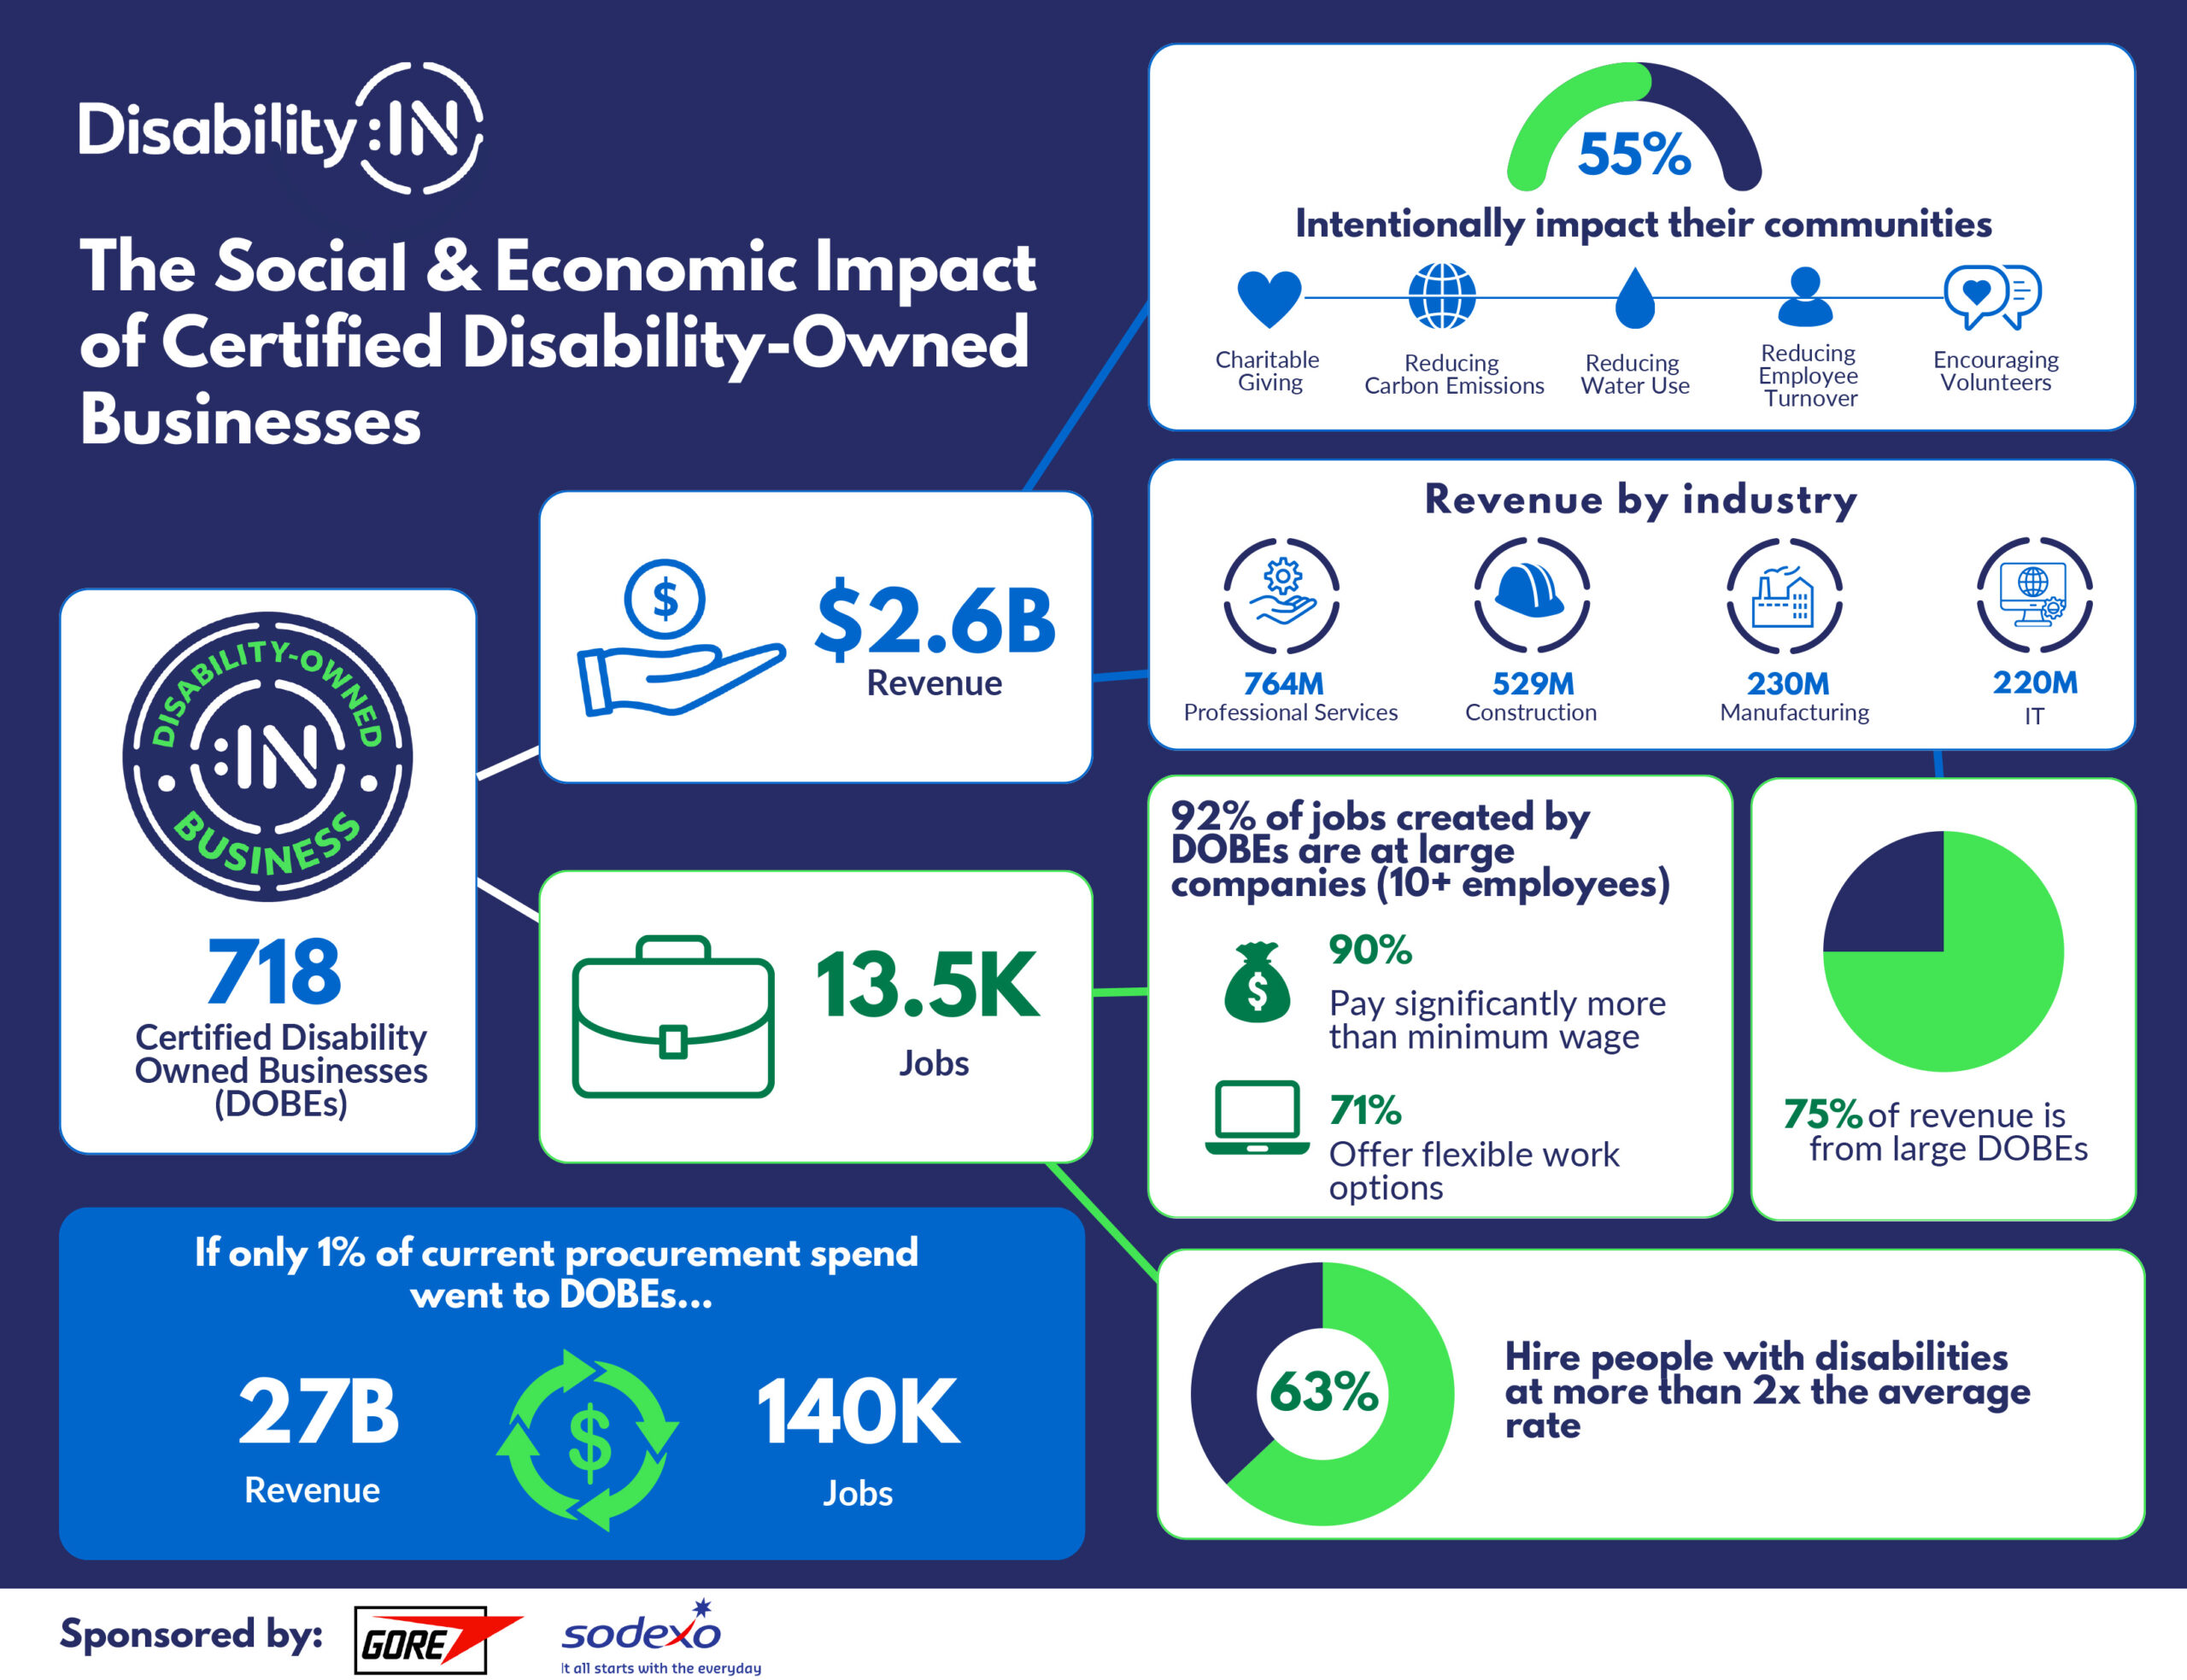 Disability:IN The Social & Economic Impact of Certified Disability-Owned Business (full accessible version in download PDF)